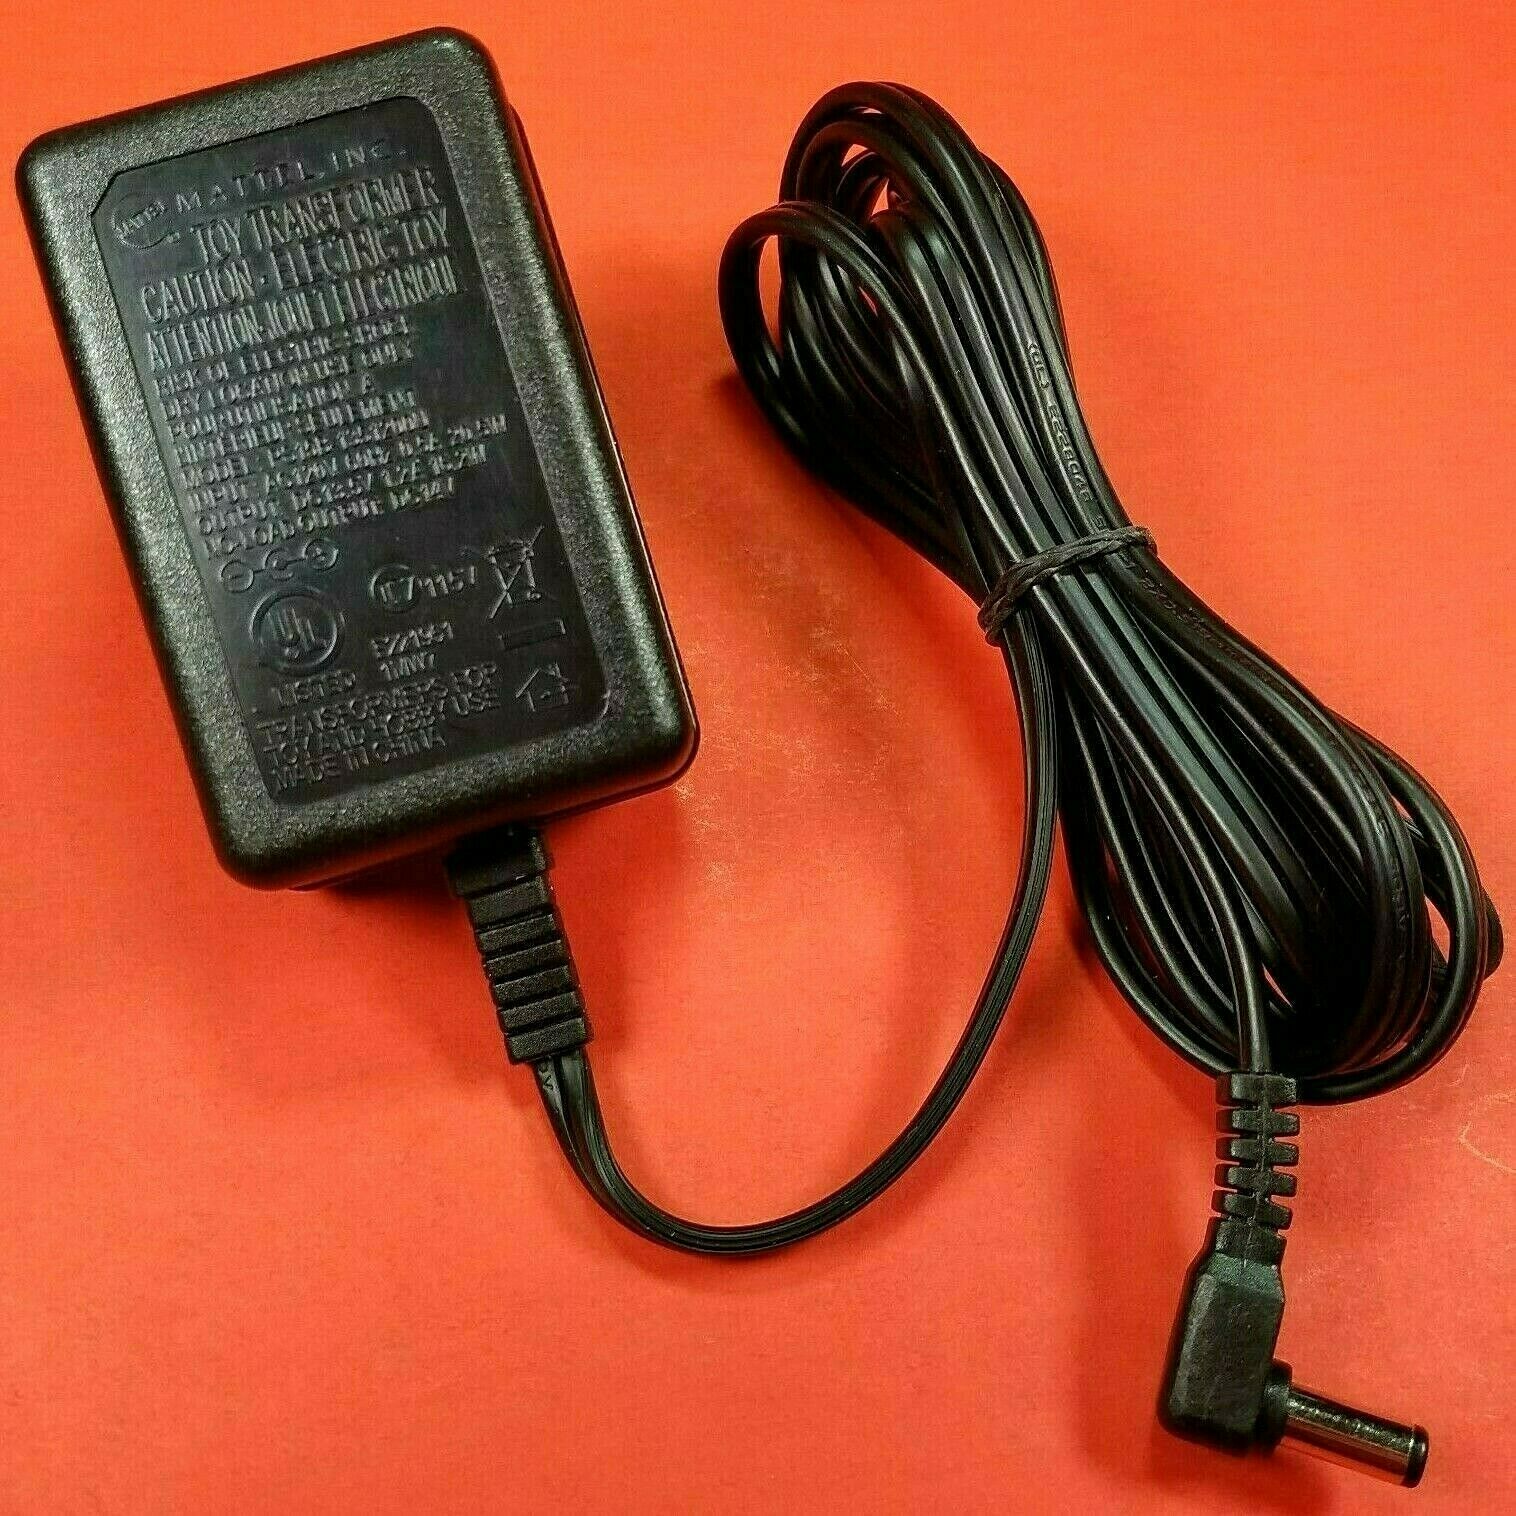 MATTEL Toy Transformer PS15B-1351200U Power Supply 13.5V 1.2A OEM AC/DC Adapter Type: Toy Transformer Features: new - Click Image to Close